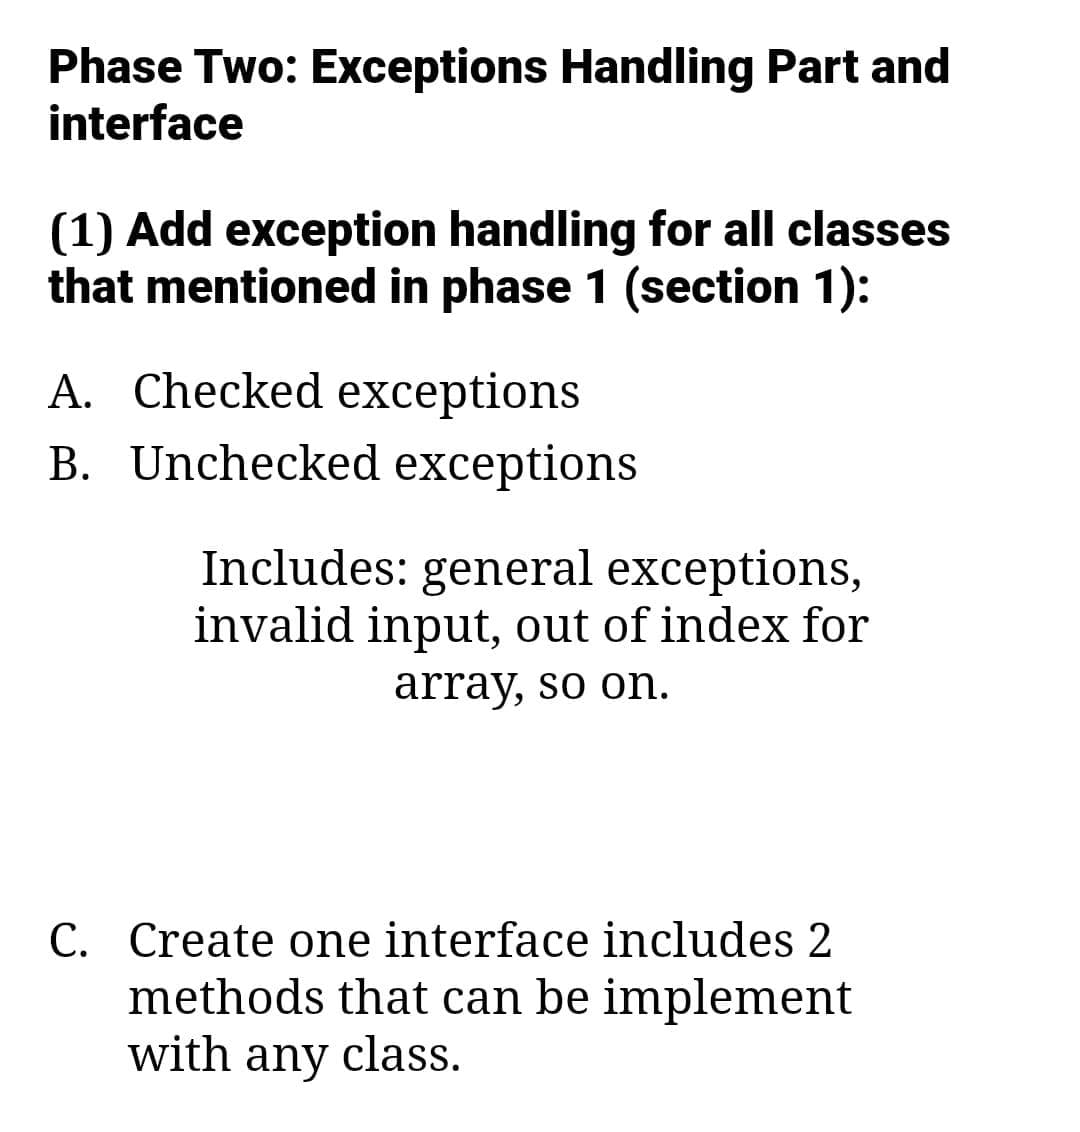 Phase Two: Exceptions Handling Part and
interface
(1) Add exception handling for all classes
that mentioned in phase 1 (section 1):
A. Checked exceptions
B. Unchecked exceptions
Includes: general exceptions,
invalid input, out of index for
array, so on.
C. Create one interface includes 2
methods that can be implement
with any class.
